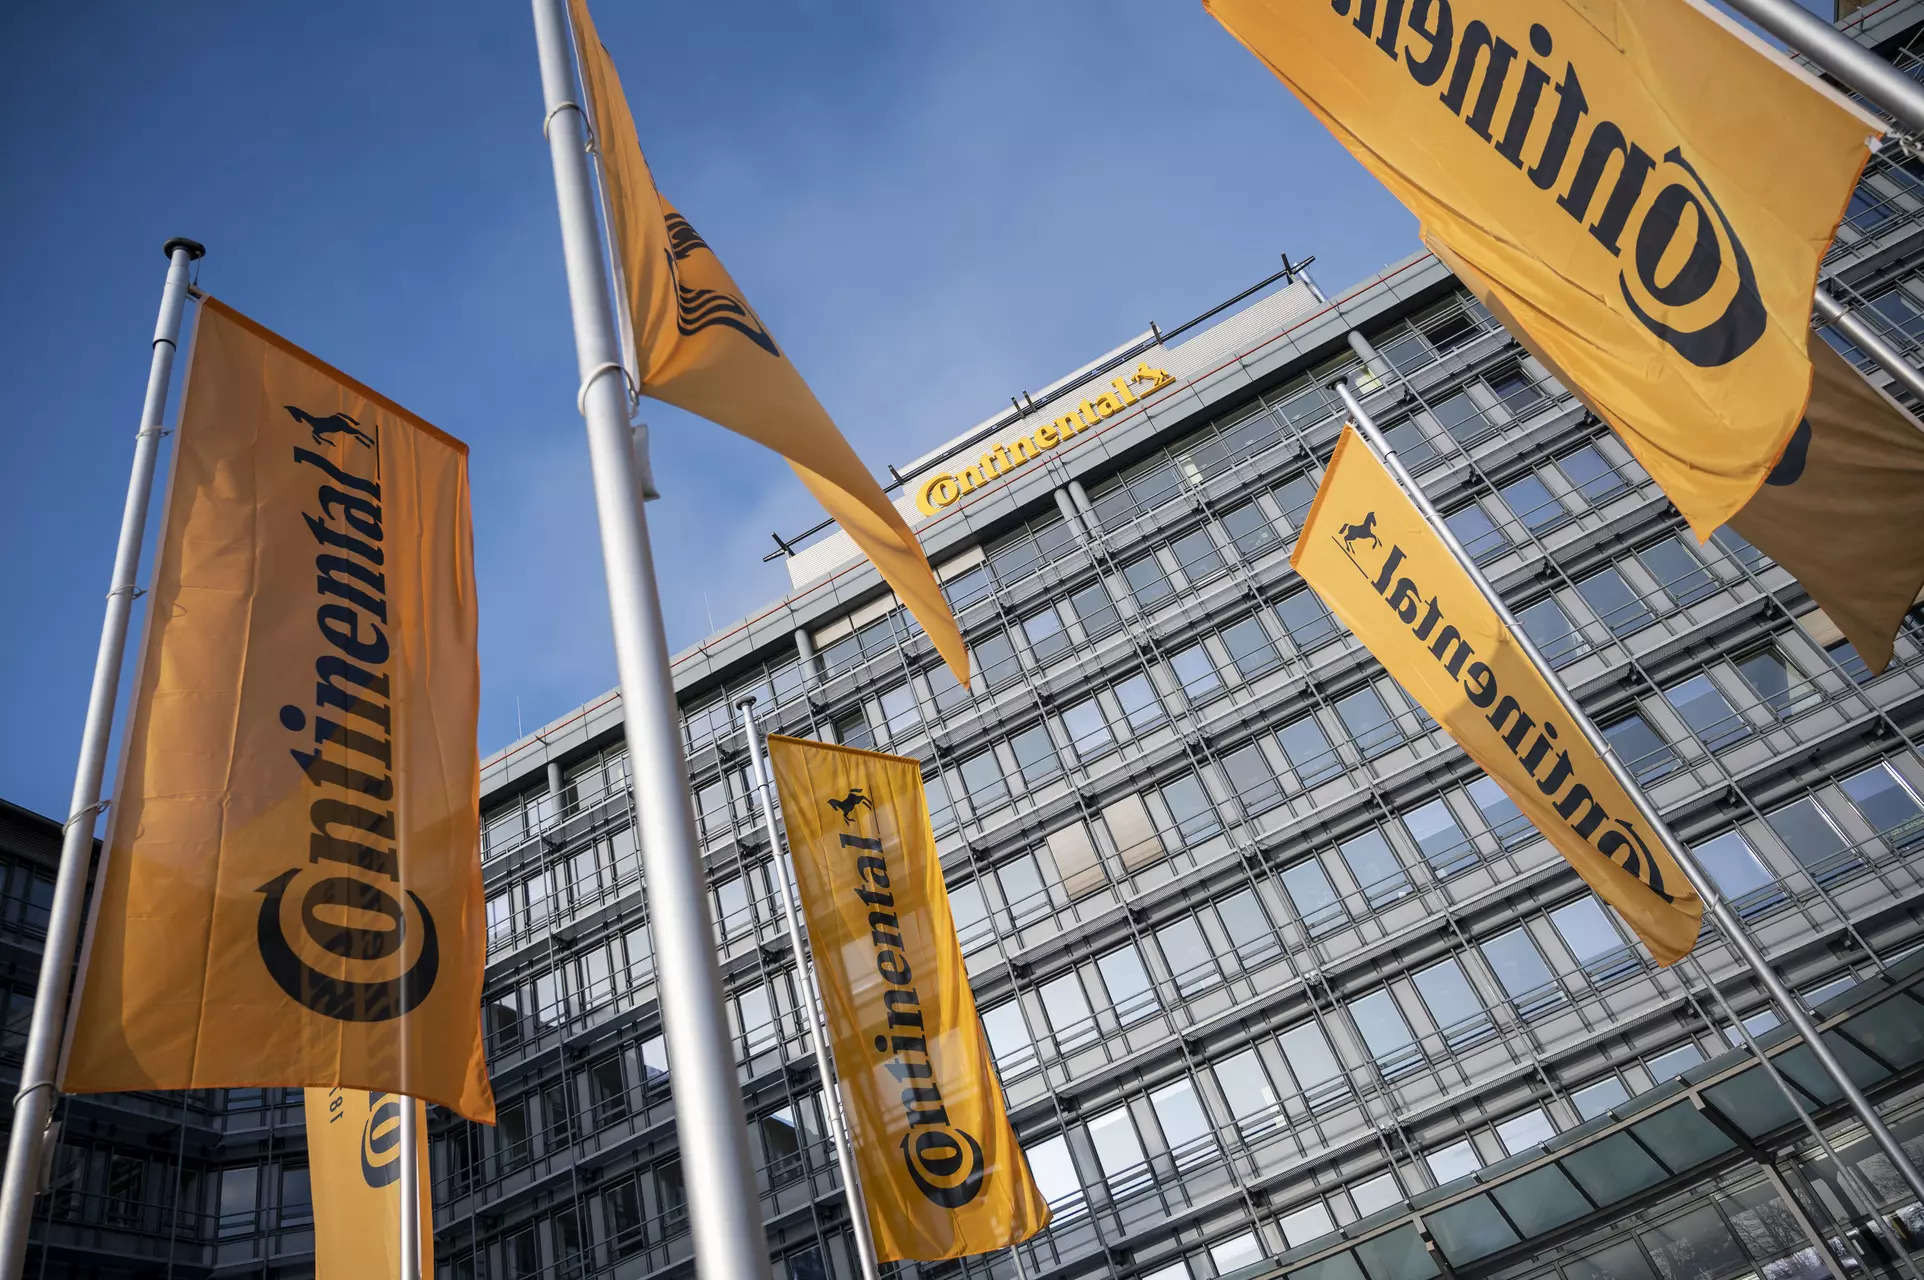 <p>Continental said on Wednesday that the job cuts, which will affect locations worldwide, would be done "gradually and as socially responsible as possible in line with local conditions".</p>